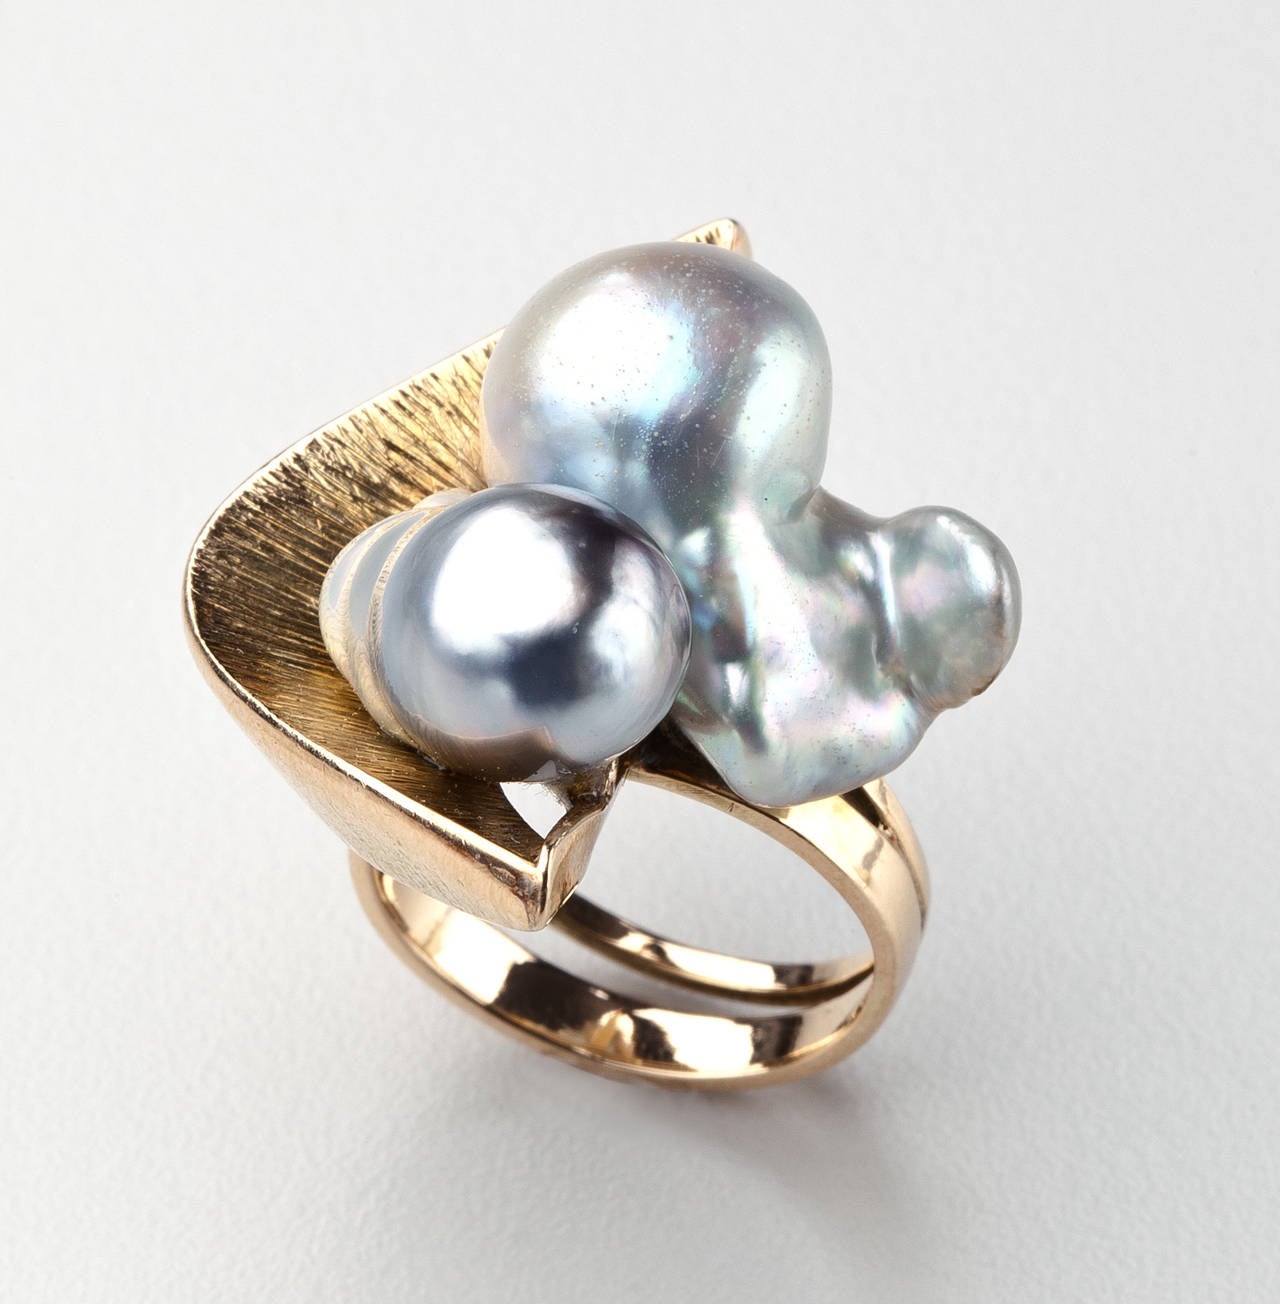 A 14 karat gold ring with two baroque pearls by Margaret de Patta (1903 - 1964).  De Patta, who worked in San Francisco, is considered one of the most influential designers of the modern jewelry movement.  She designed this ring with a textured gold